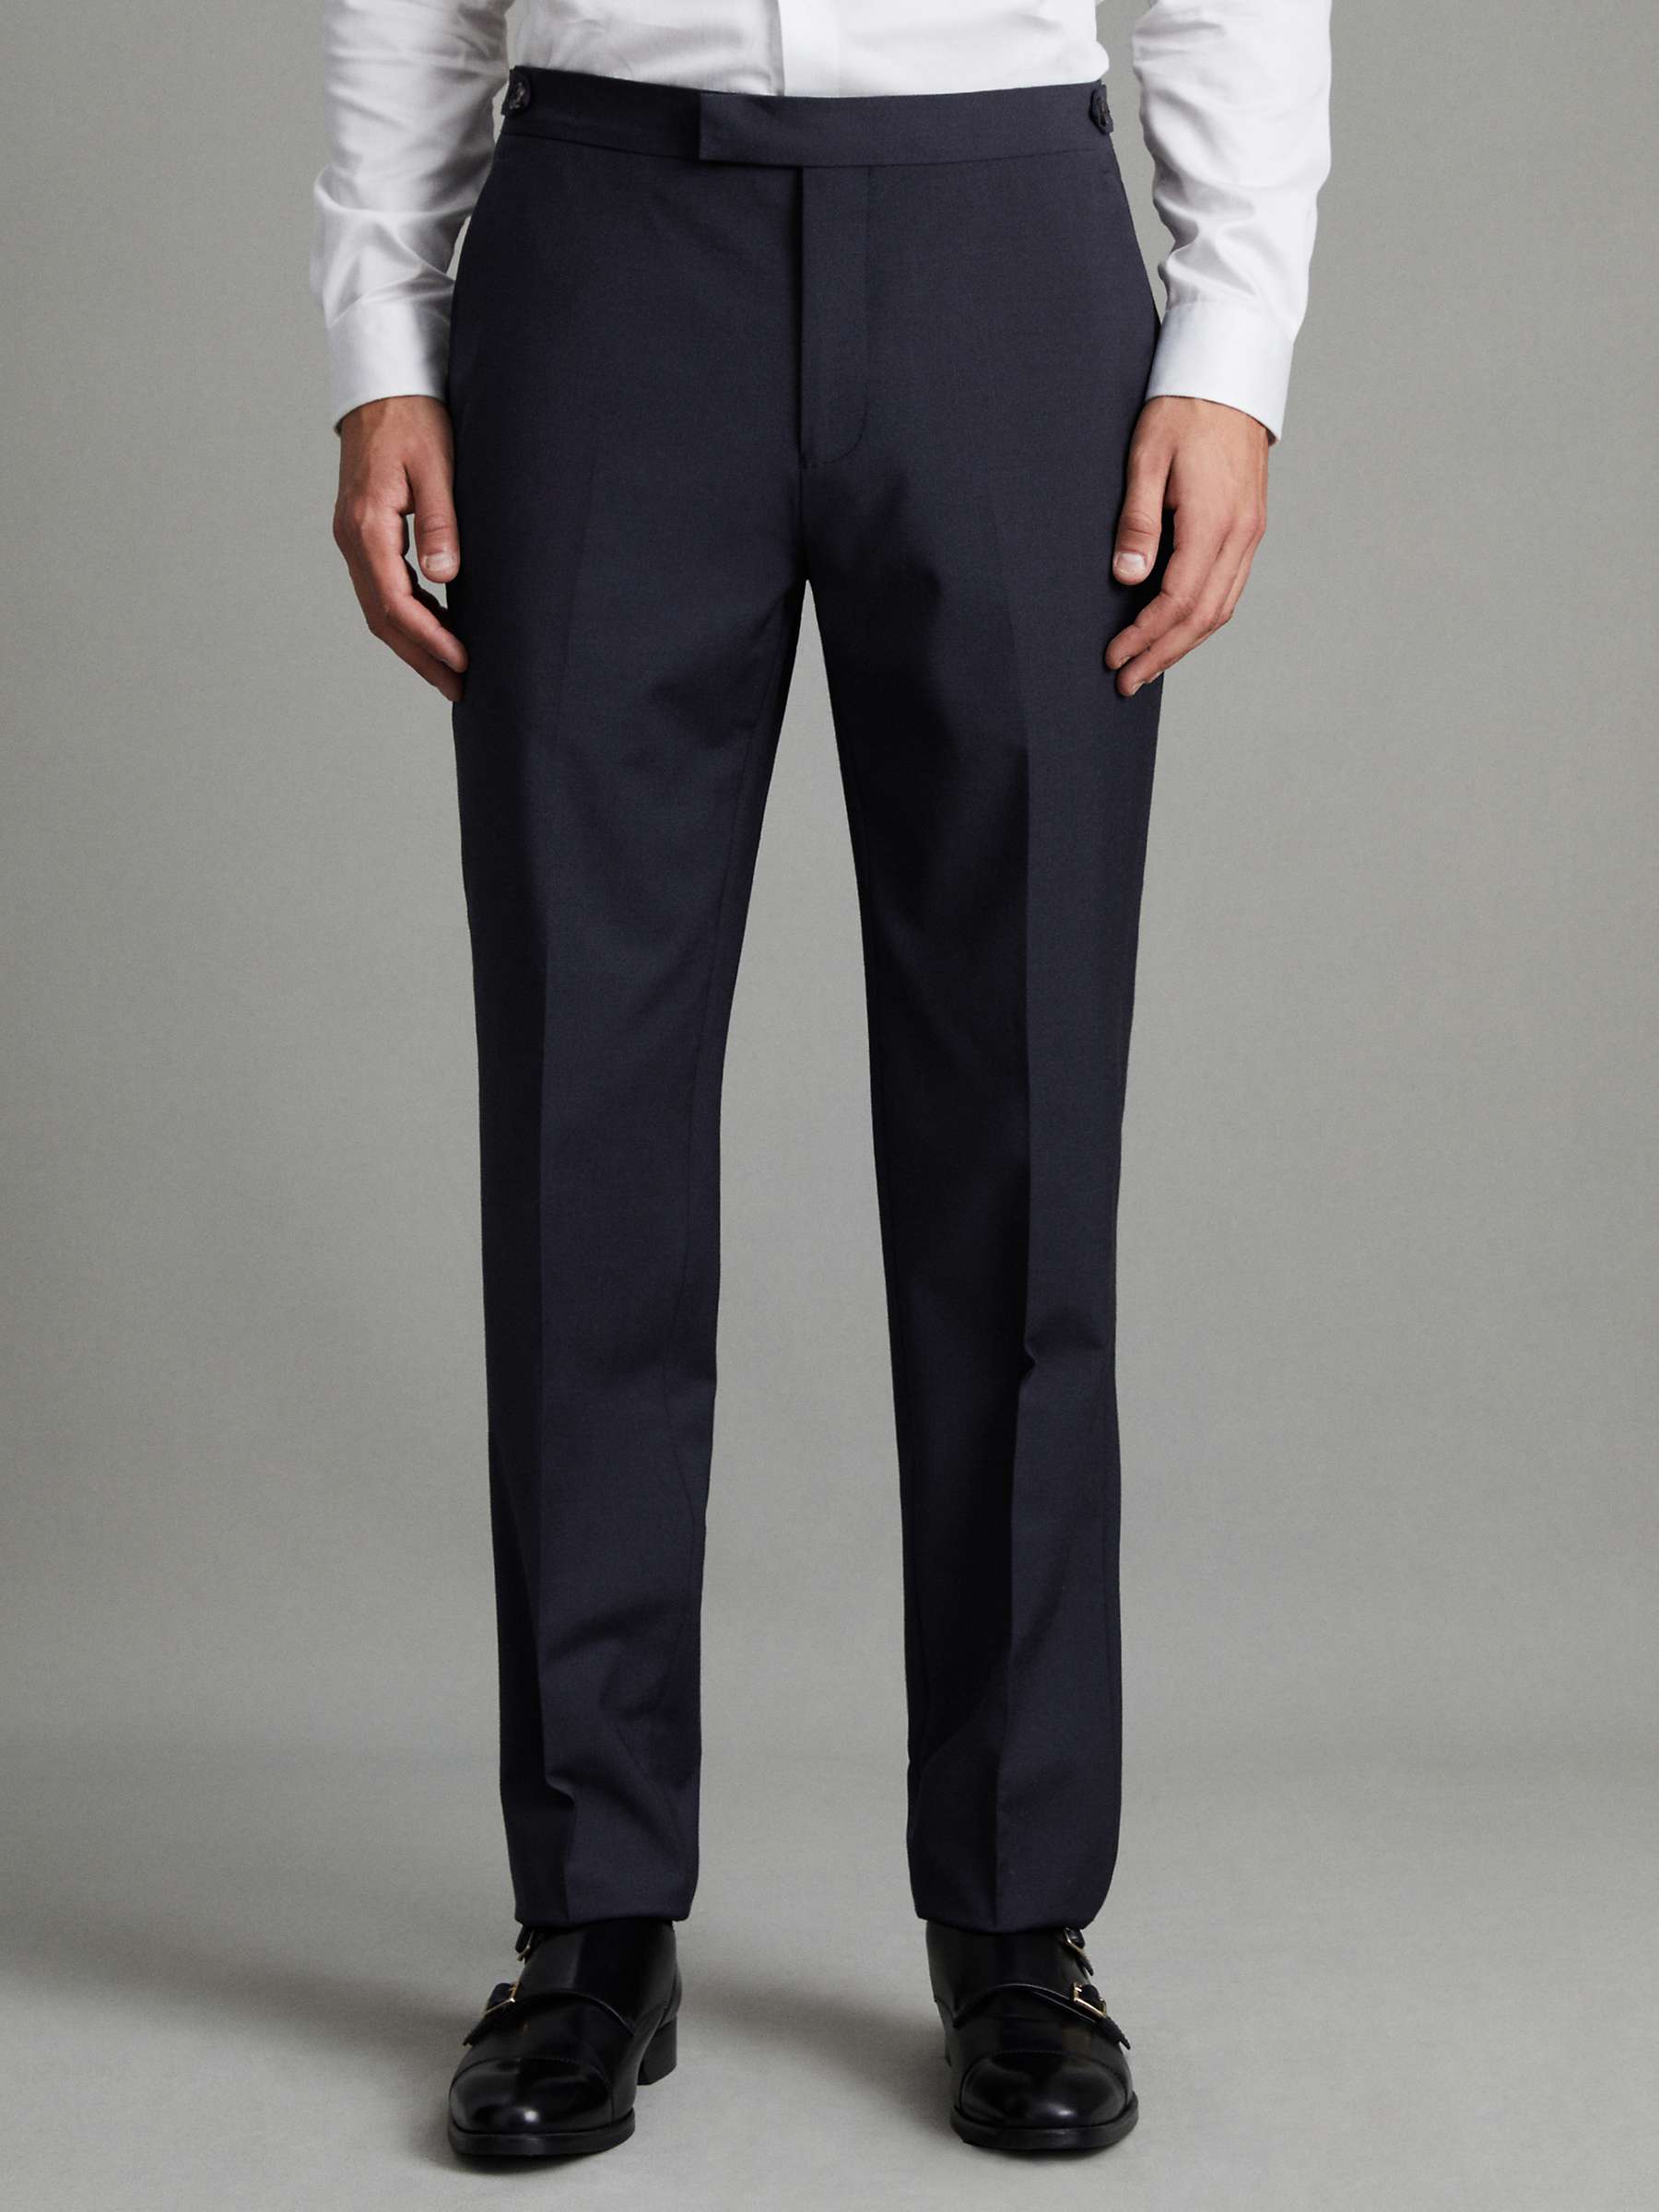 Buy Reiss Hope Modern Fit Travel Trousers, Navy Online at johnlewis.com